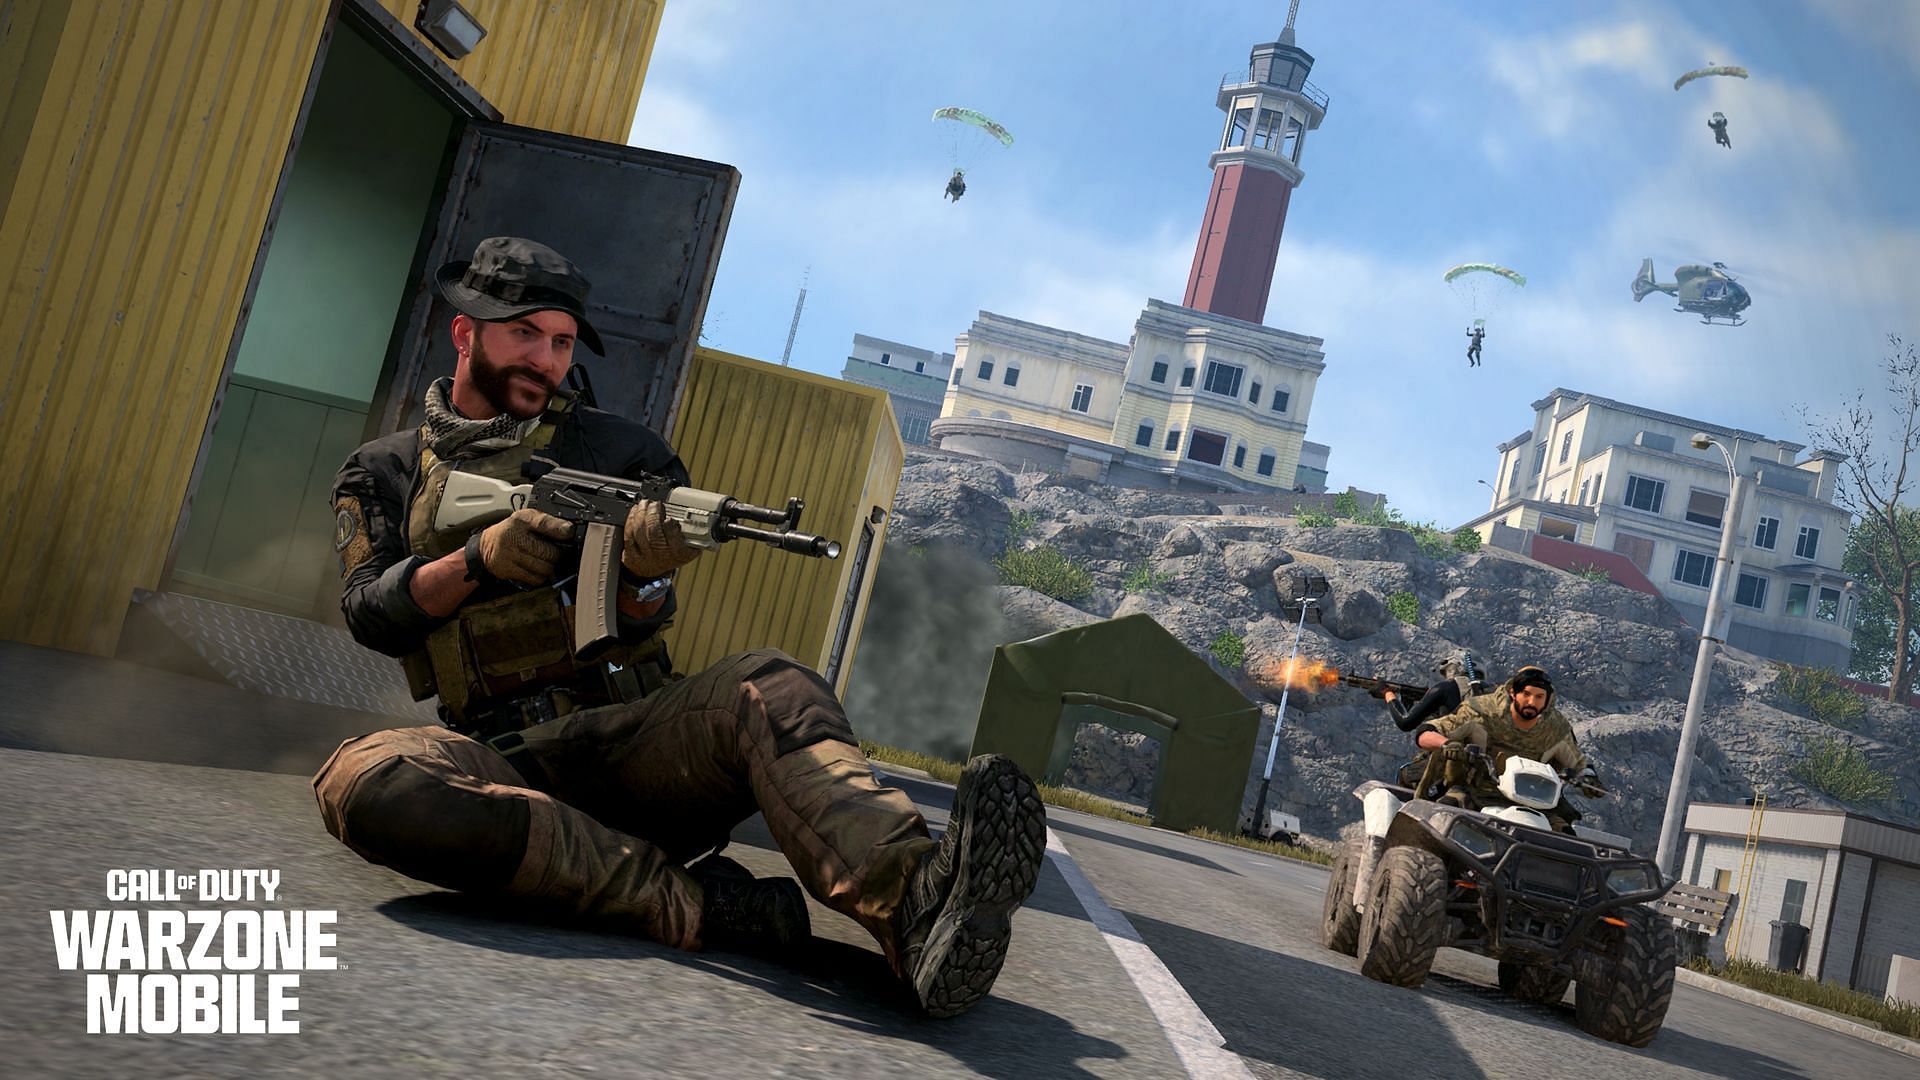 Captain Price slide cancelling with a rifle in Warzone Mobile on the map Verdansk